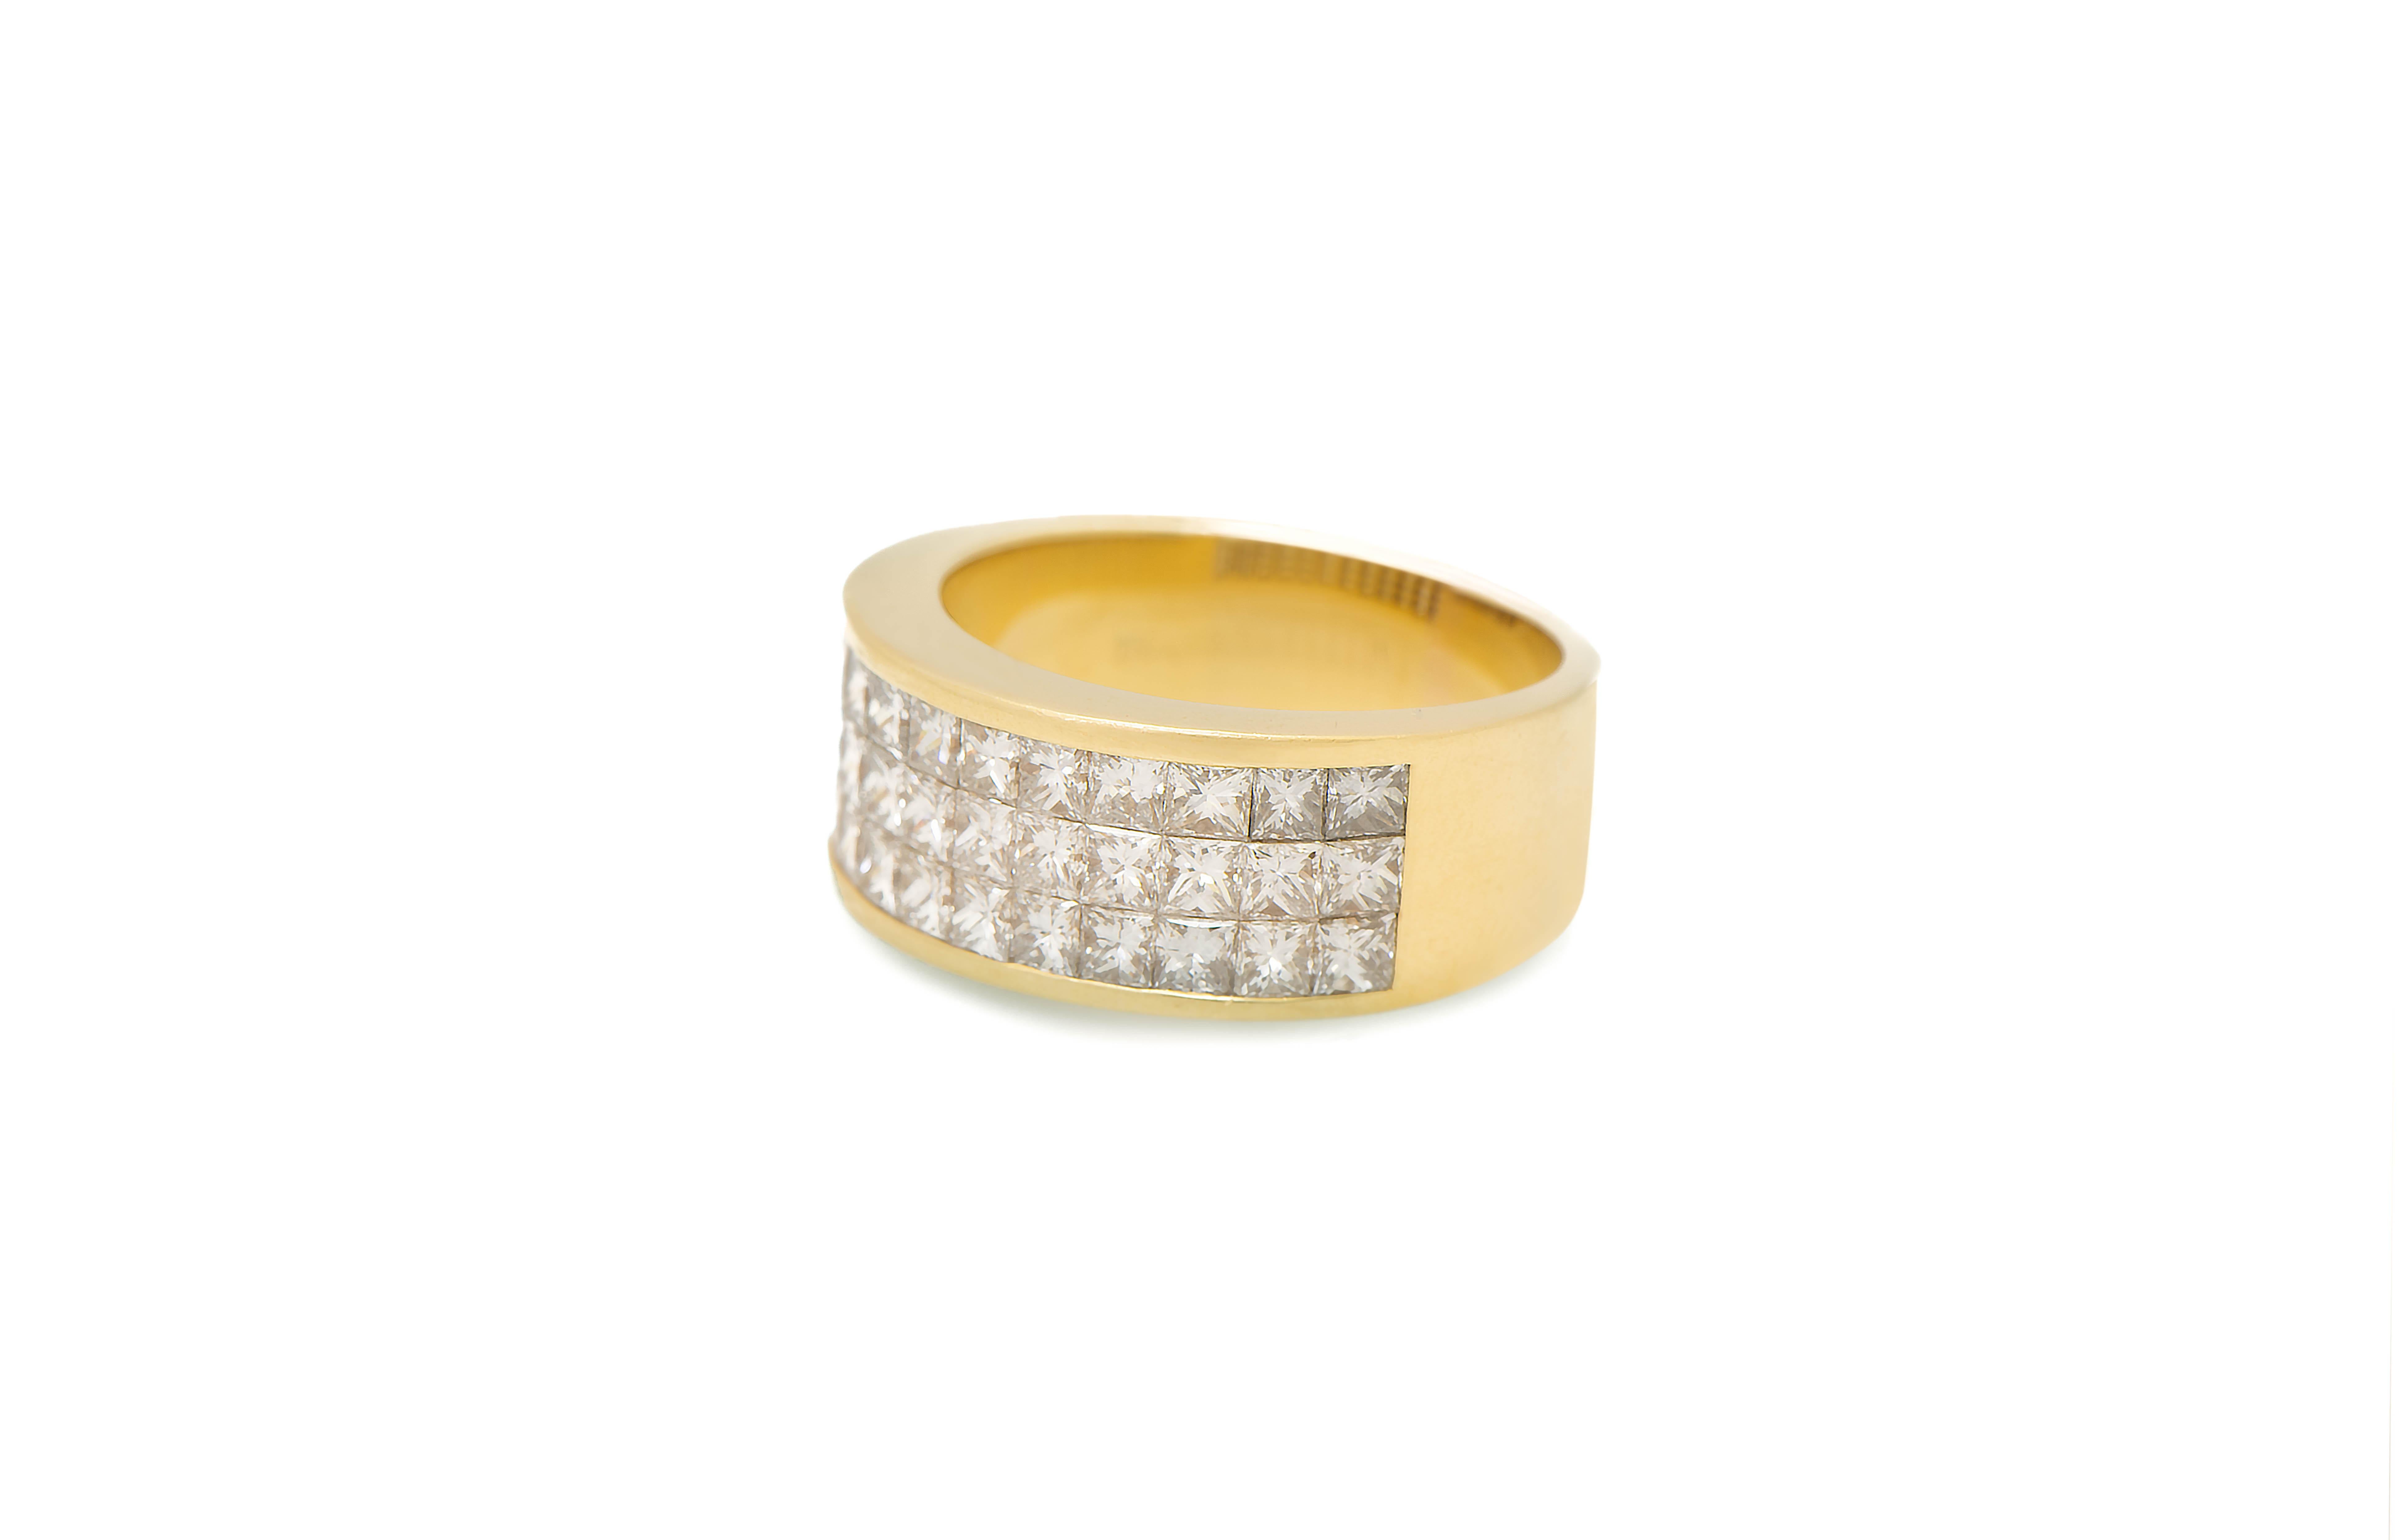 Three Row Men's Diamond Ring Band set in 18K Yellow Gold

Diamond Weight: Approx 2.00 Cts

Ring Size: 11
Resizable free of charge